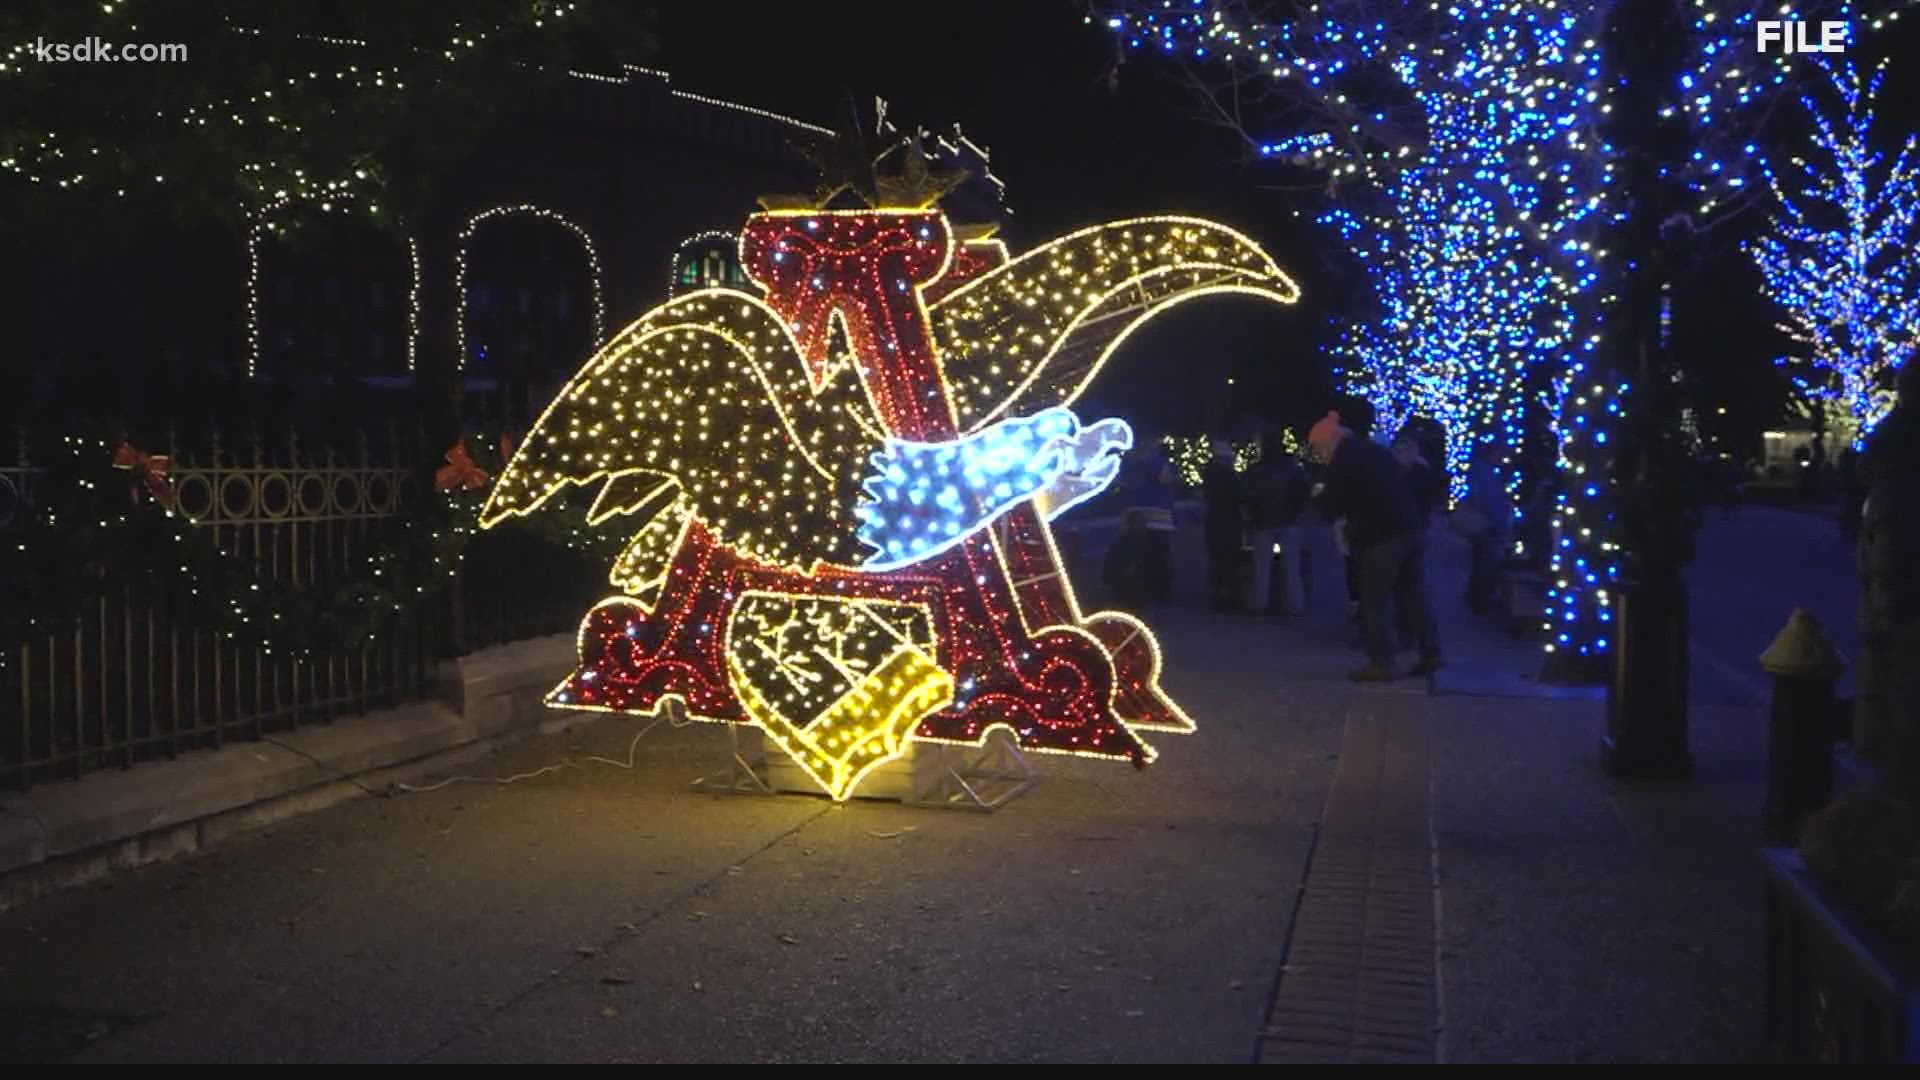 The holiday lights will soon be twinkling again at the Anheuser-Busch Brewery in St. Louis.